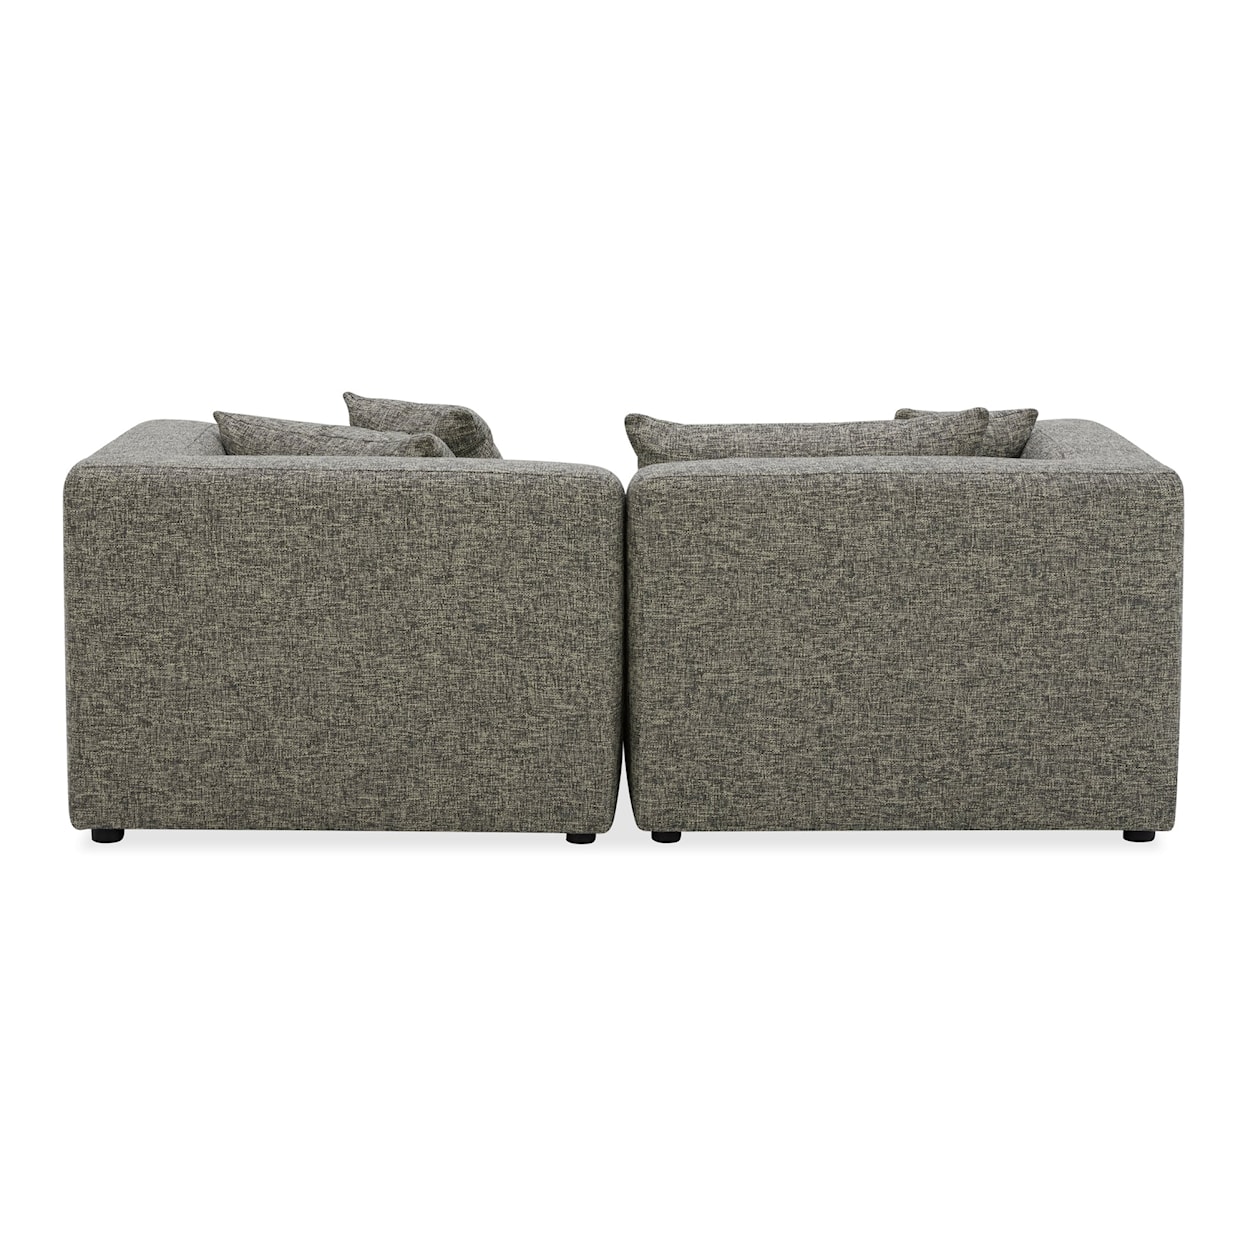 Moe's Home Collection Lowtide 3-Piece Sectional Sofa